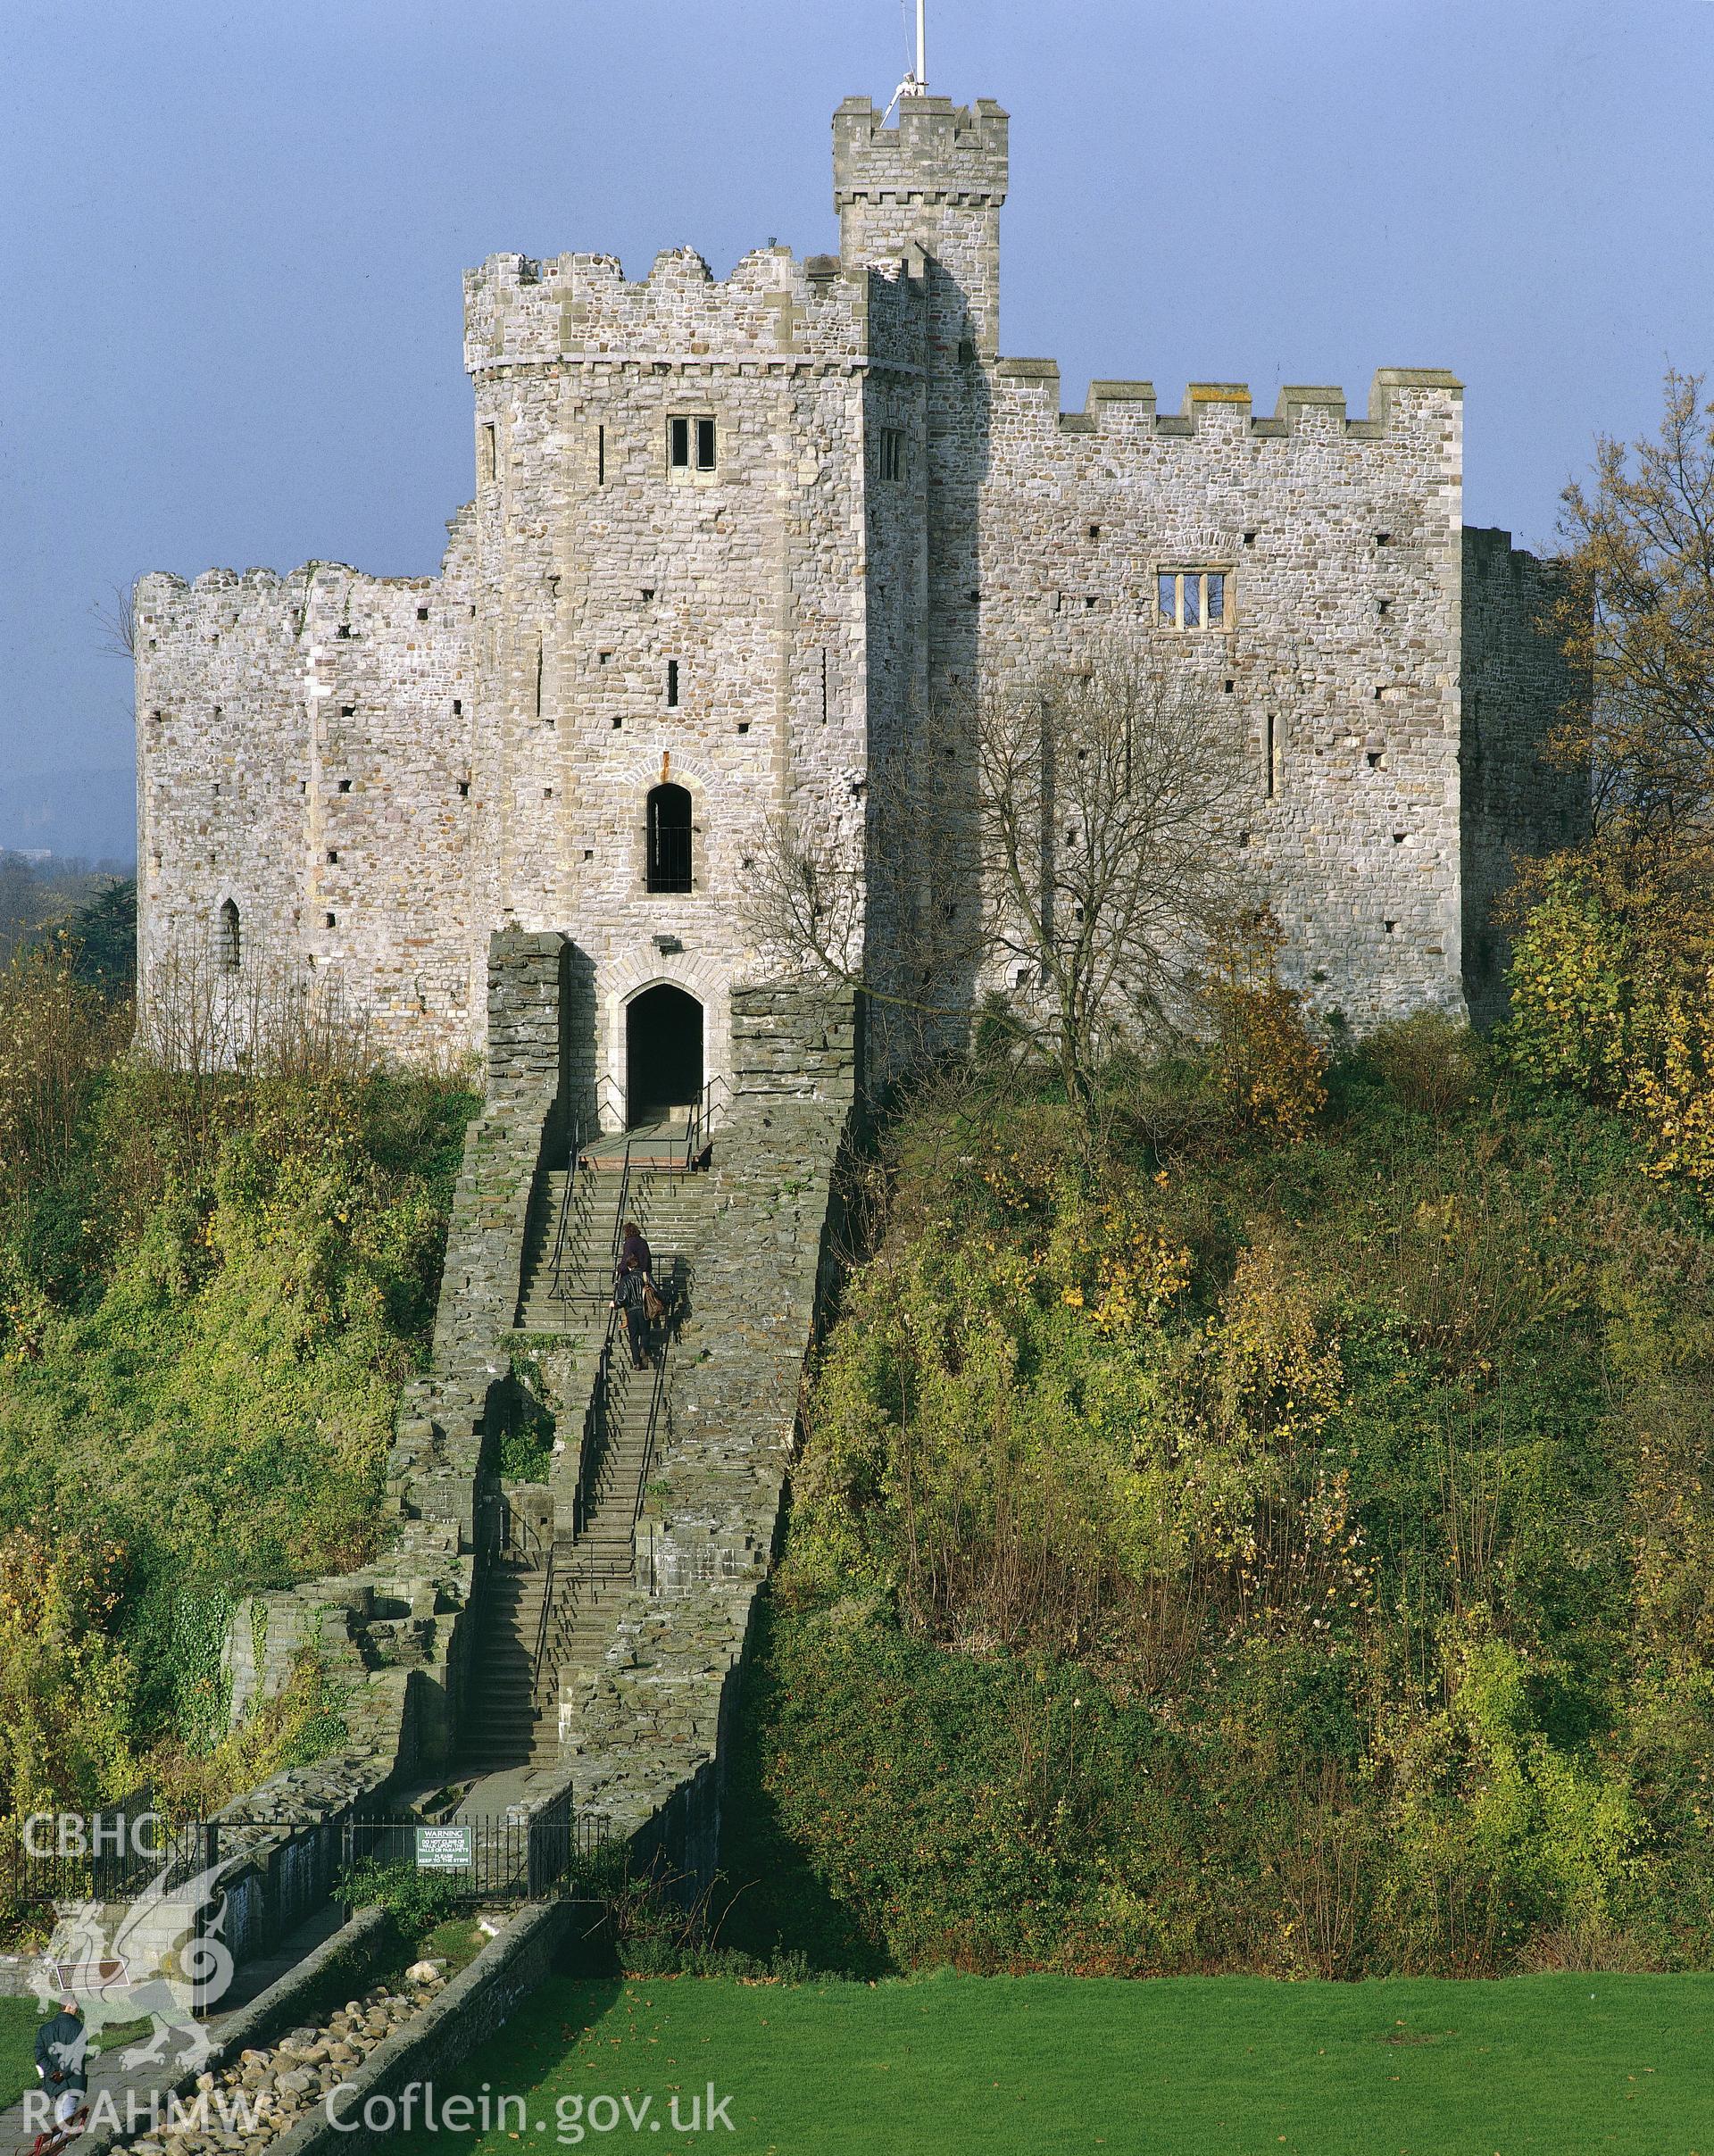 RCAHMW colour transparency of a general exterior view of Cardiff Castle.